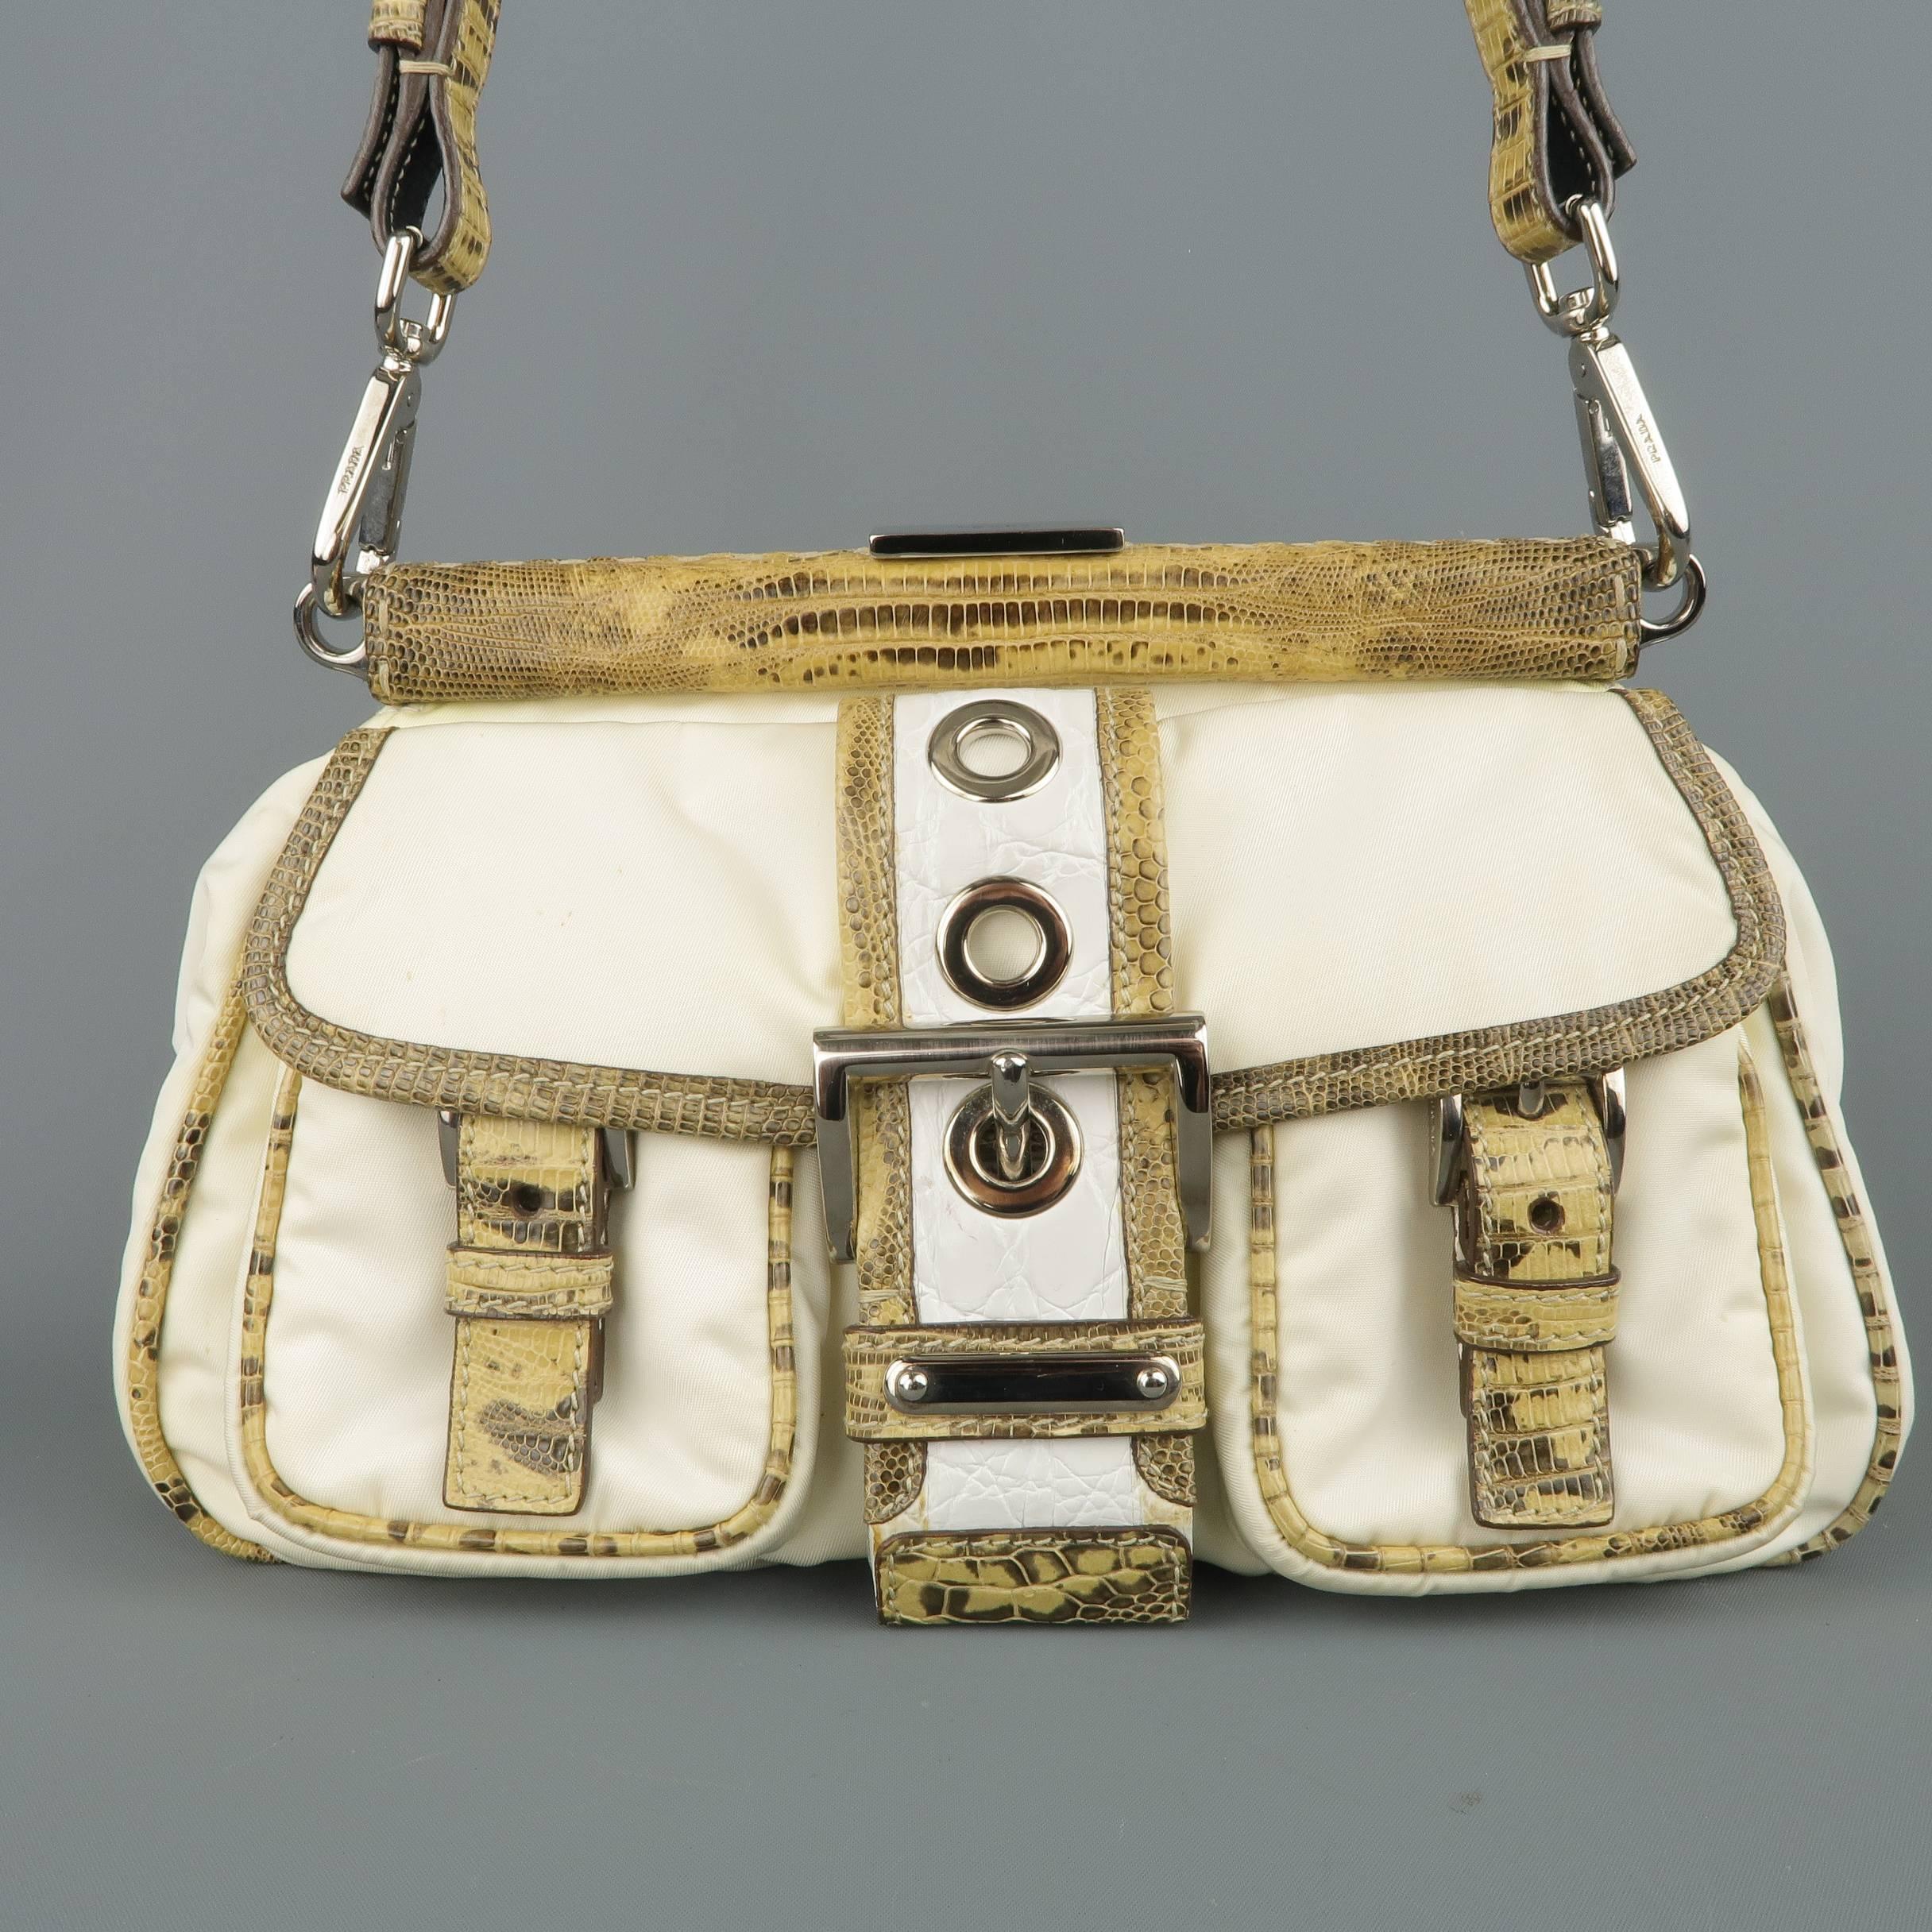 PRADA mini shoulder bag comes in cream nylon and features a hinge closure, frontal pockets, lizard skin leather piping and shoulder strap, and frontal white crocodile embossed leather grommet belt with buckle. Discoloration and wear throughout